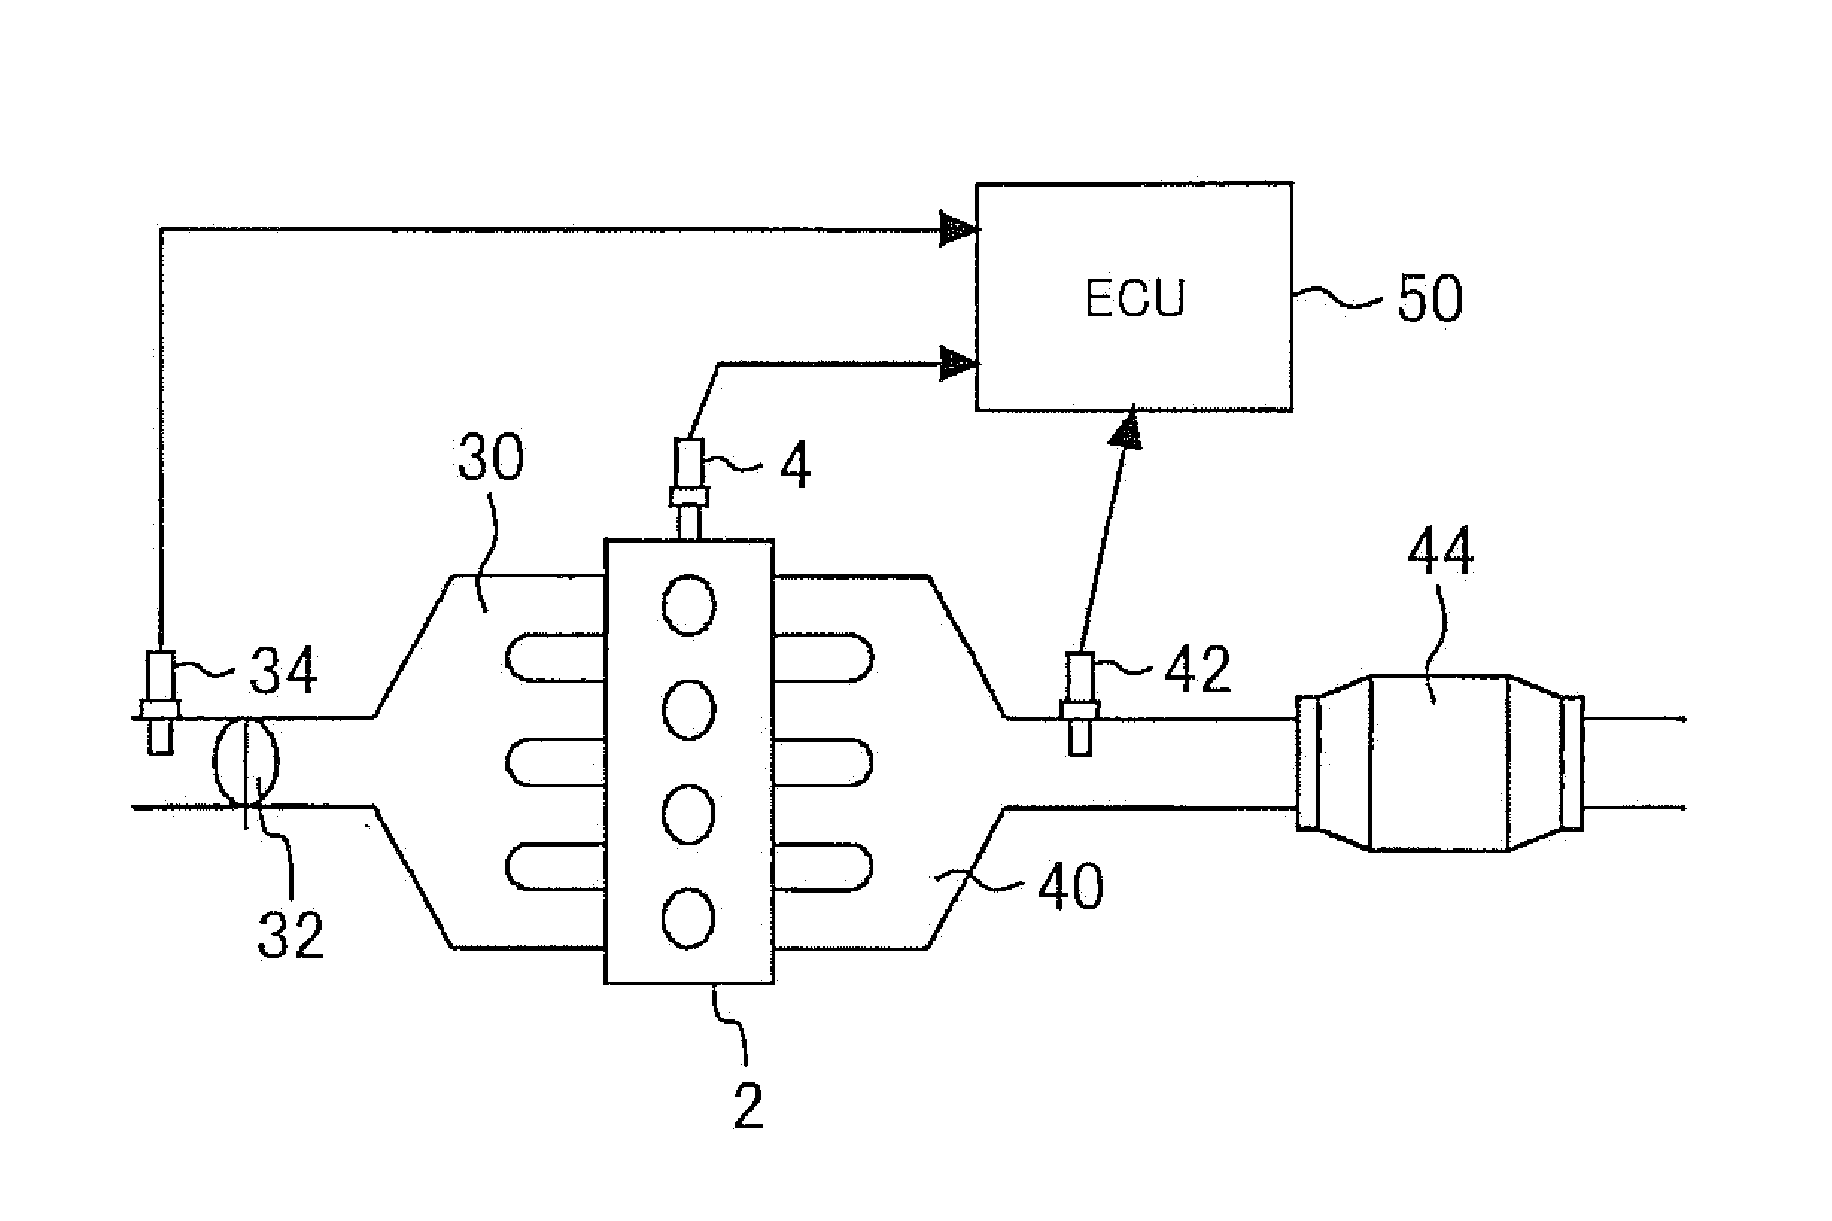 Inter-cylinder air-fuel ratio imbalance detection apparatus for internal combustion engine